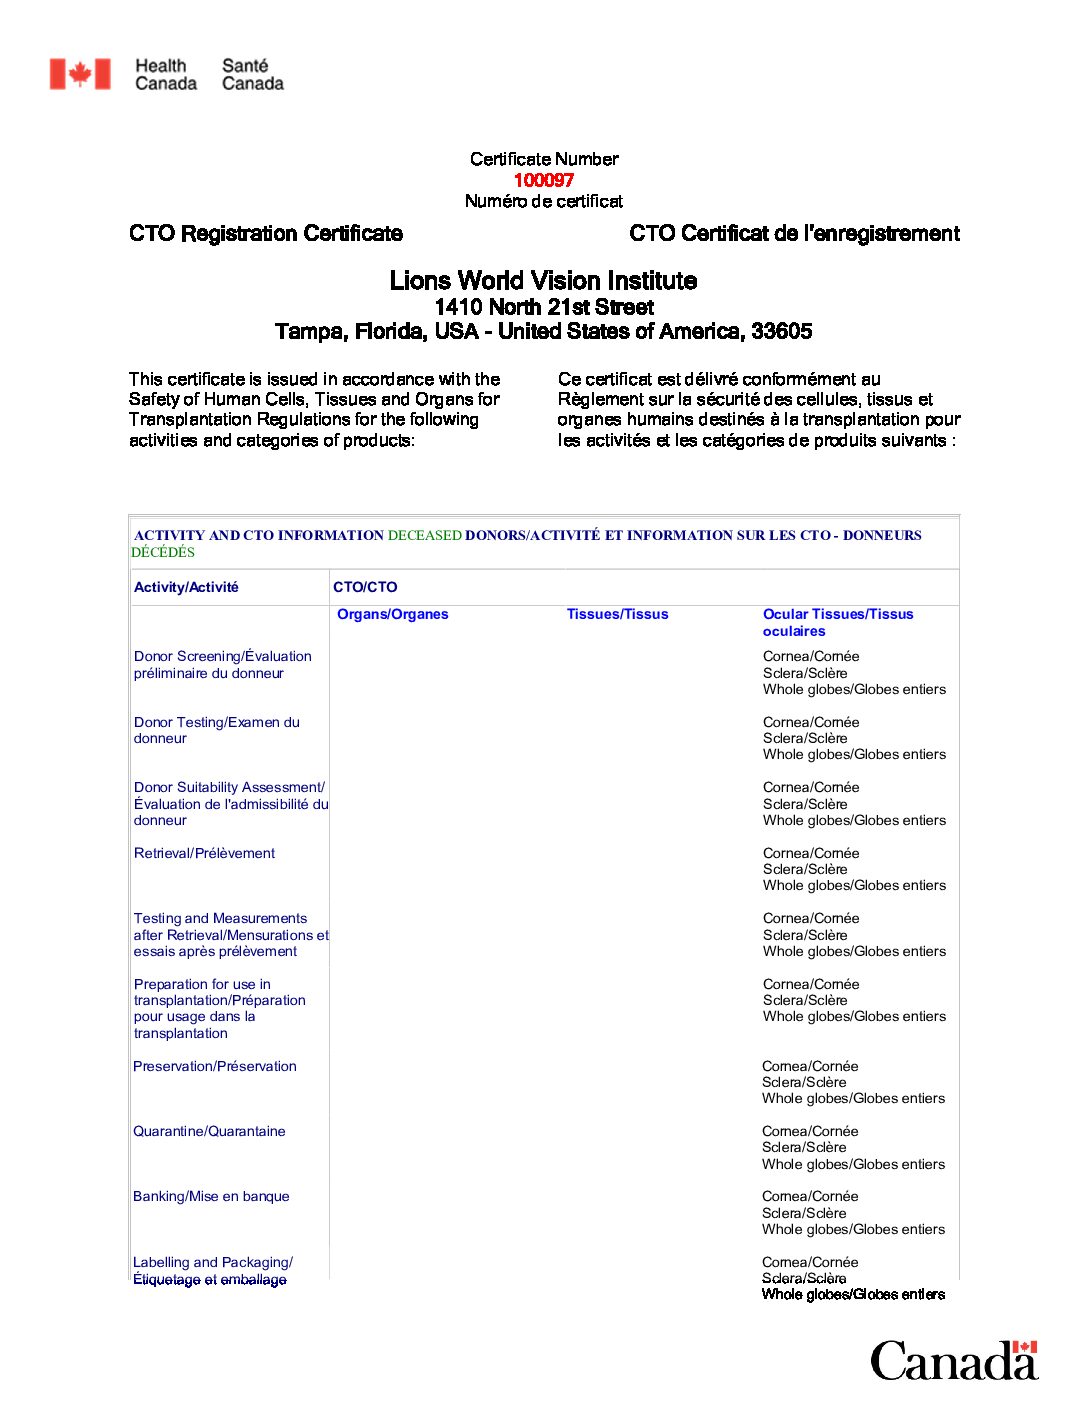 Click to open the Health Canada CTO (Cells/Tissues/Organs) Registration file